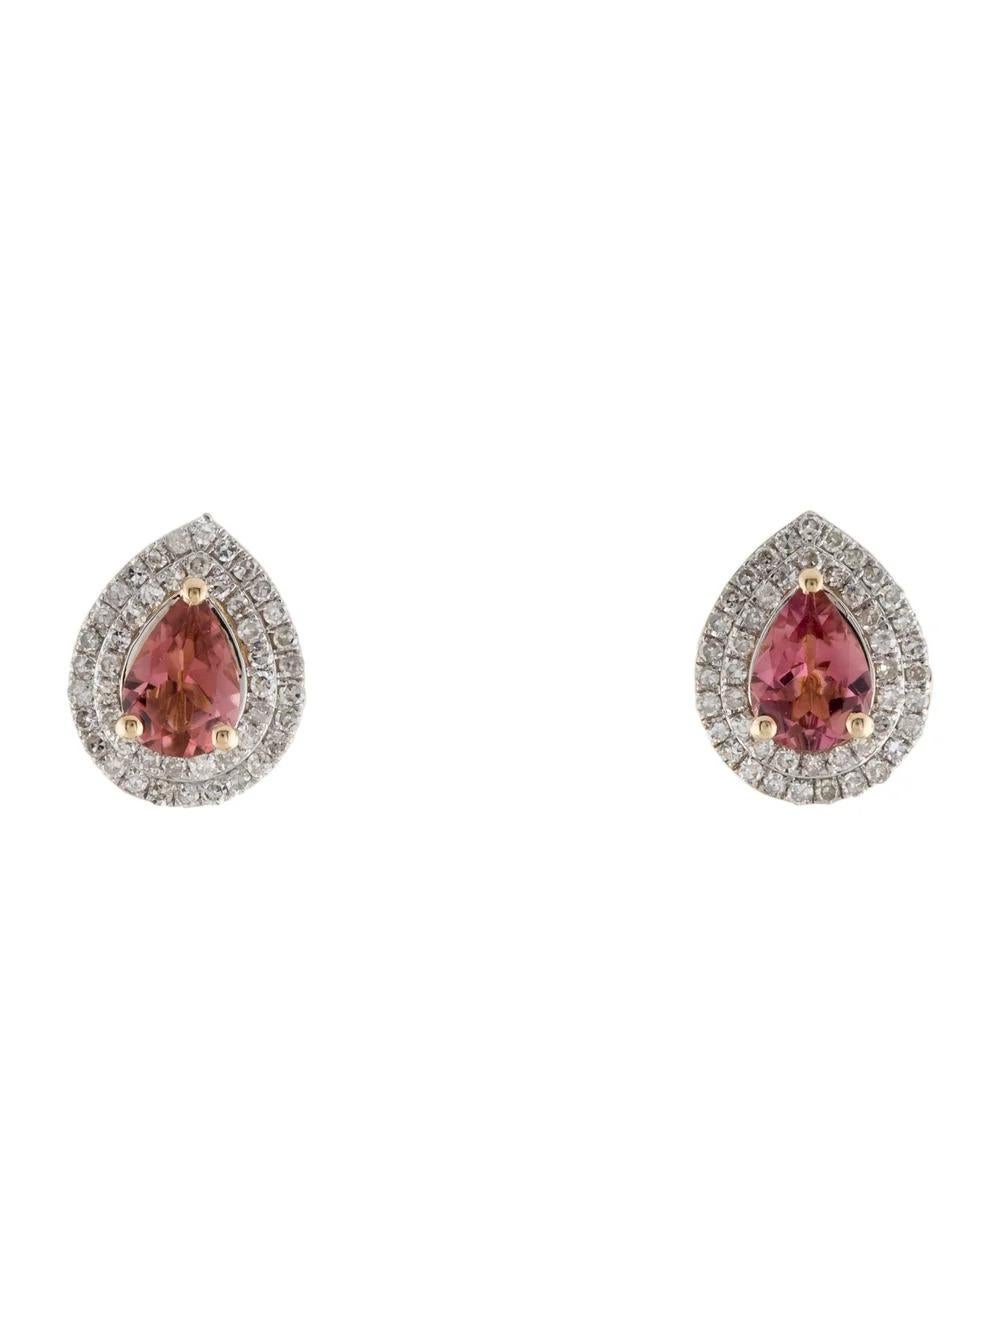 Elevate your elegance with these exquisite Rhodium-Plated 14K White Gold & 14K Yellow Gold earrings, featuring captivating Faceted Pear Shaped Tourmalines and dazzling Diamonds. Crafted with meticulous attention to detail, these earrings exude